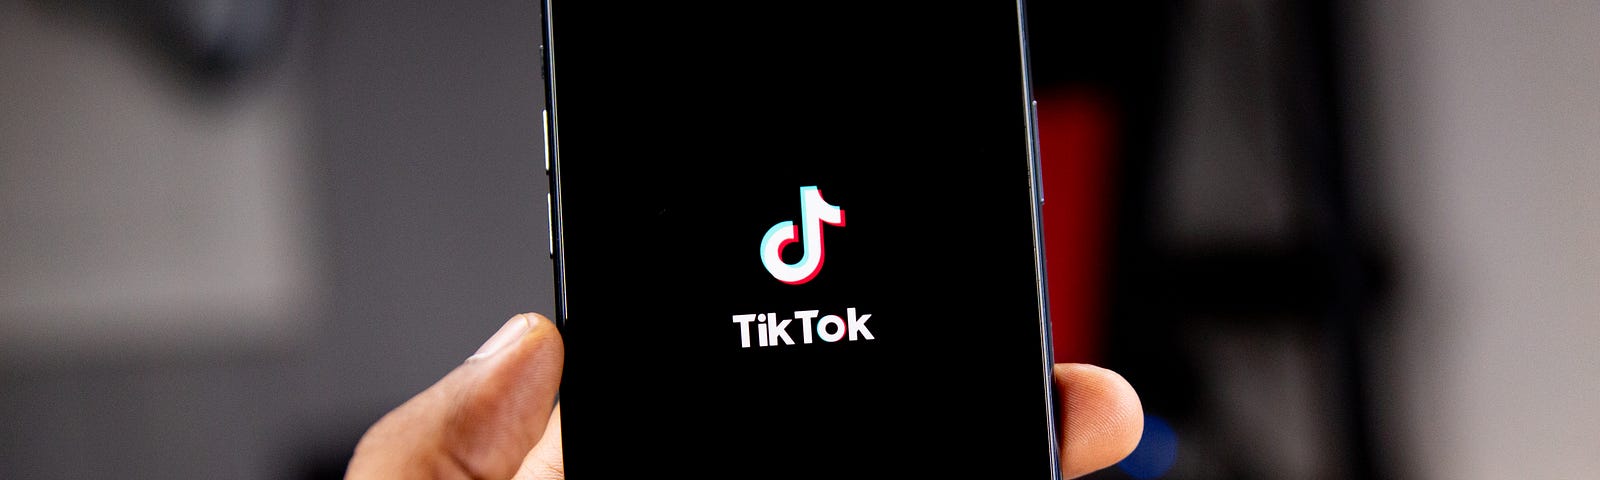 A left hand holding a smartphone with a black screen expect for the TikTok logo in the middle as the app loads.